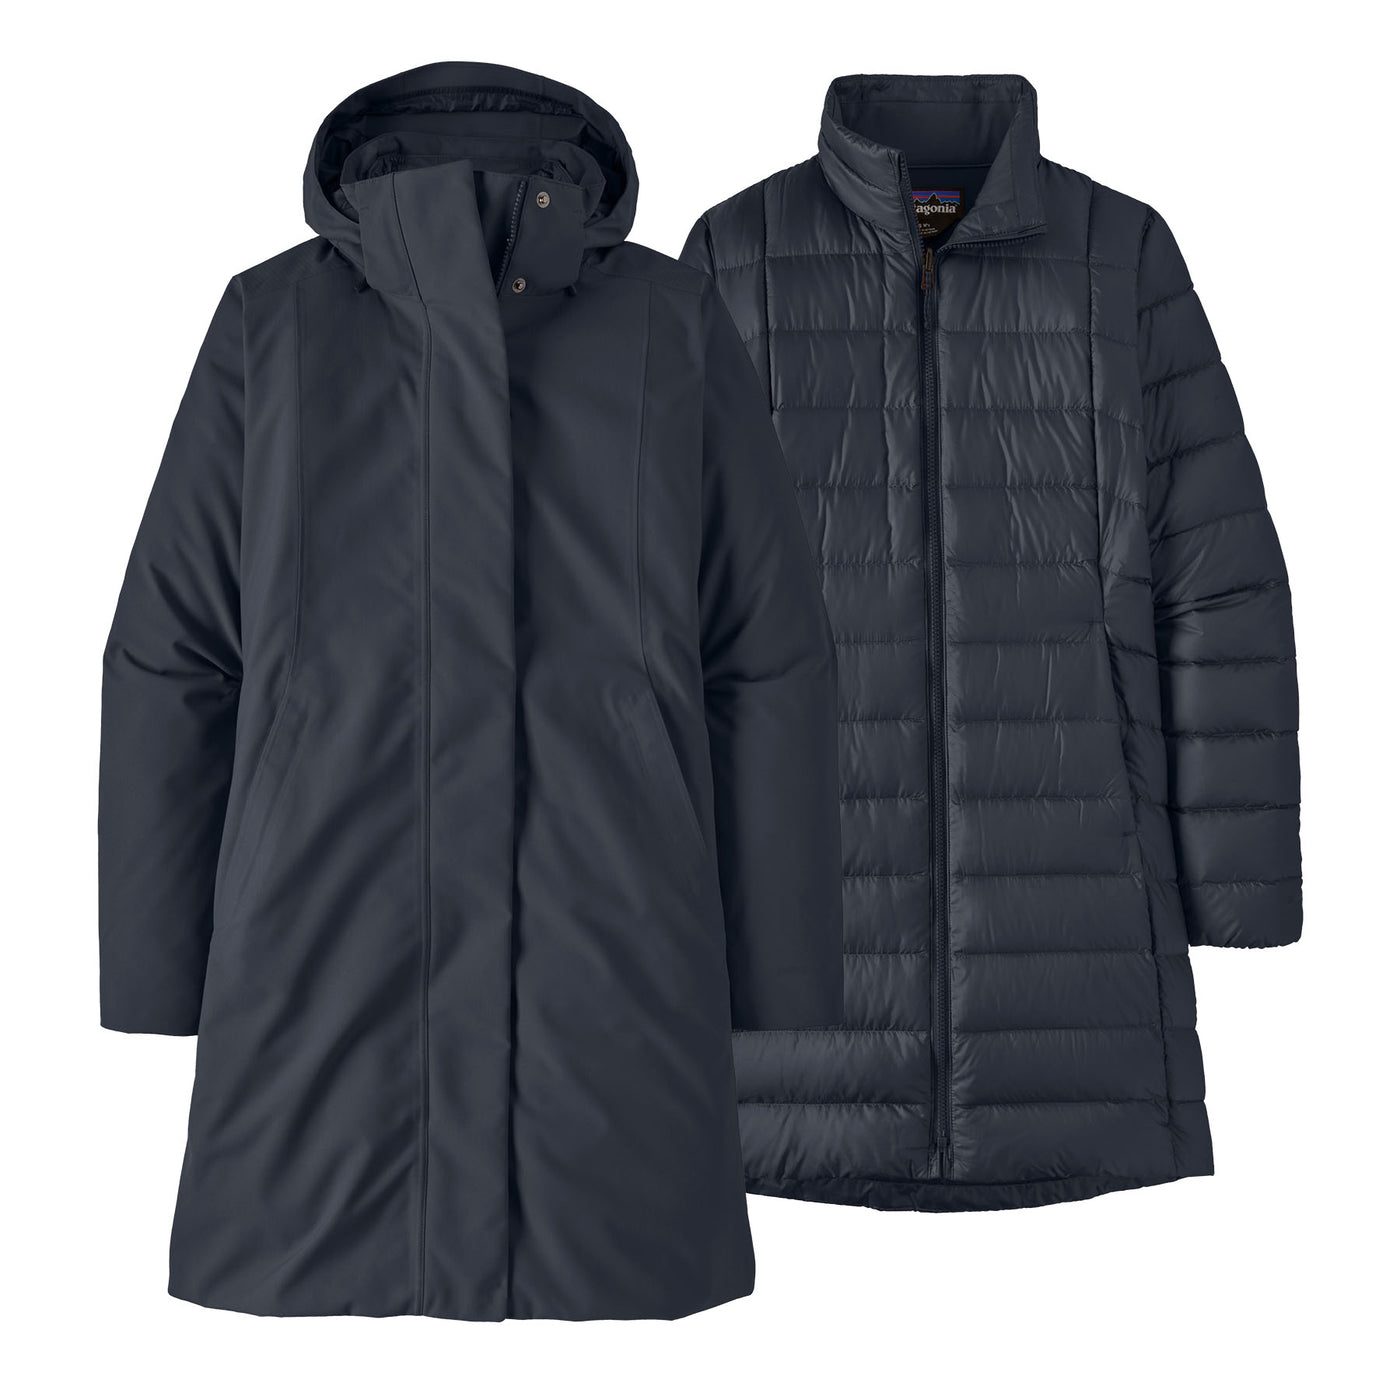 PATAGONIA Women's Tres 3-in-1 Parka